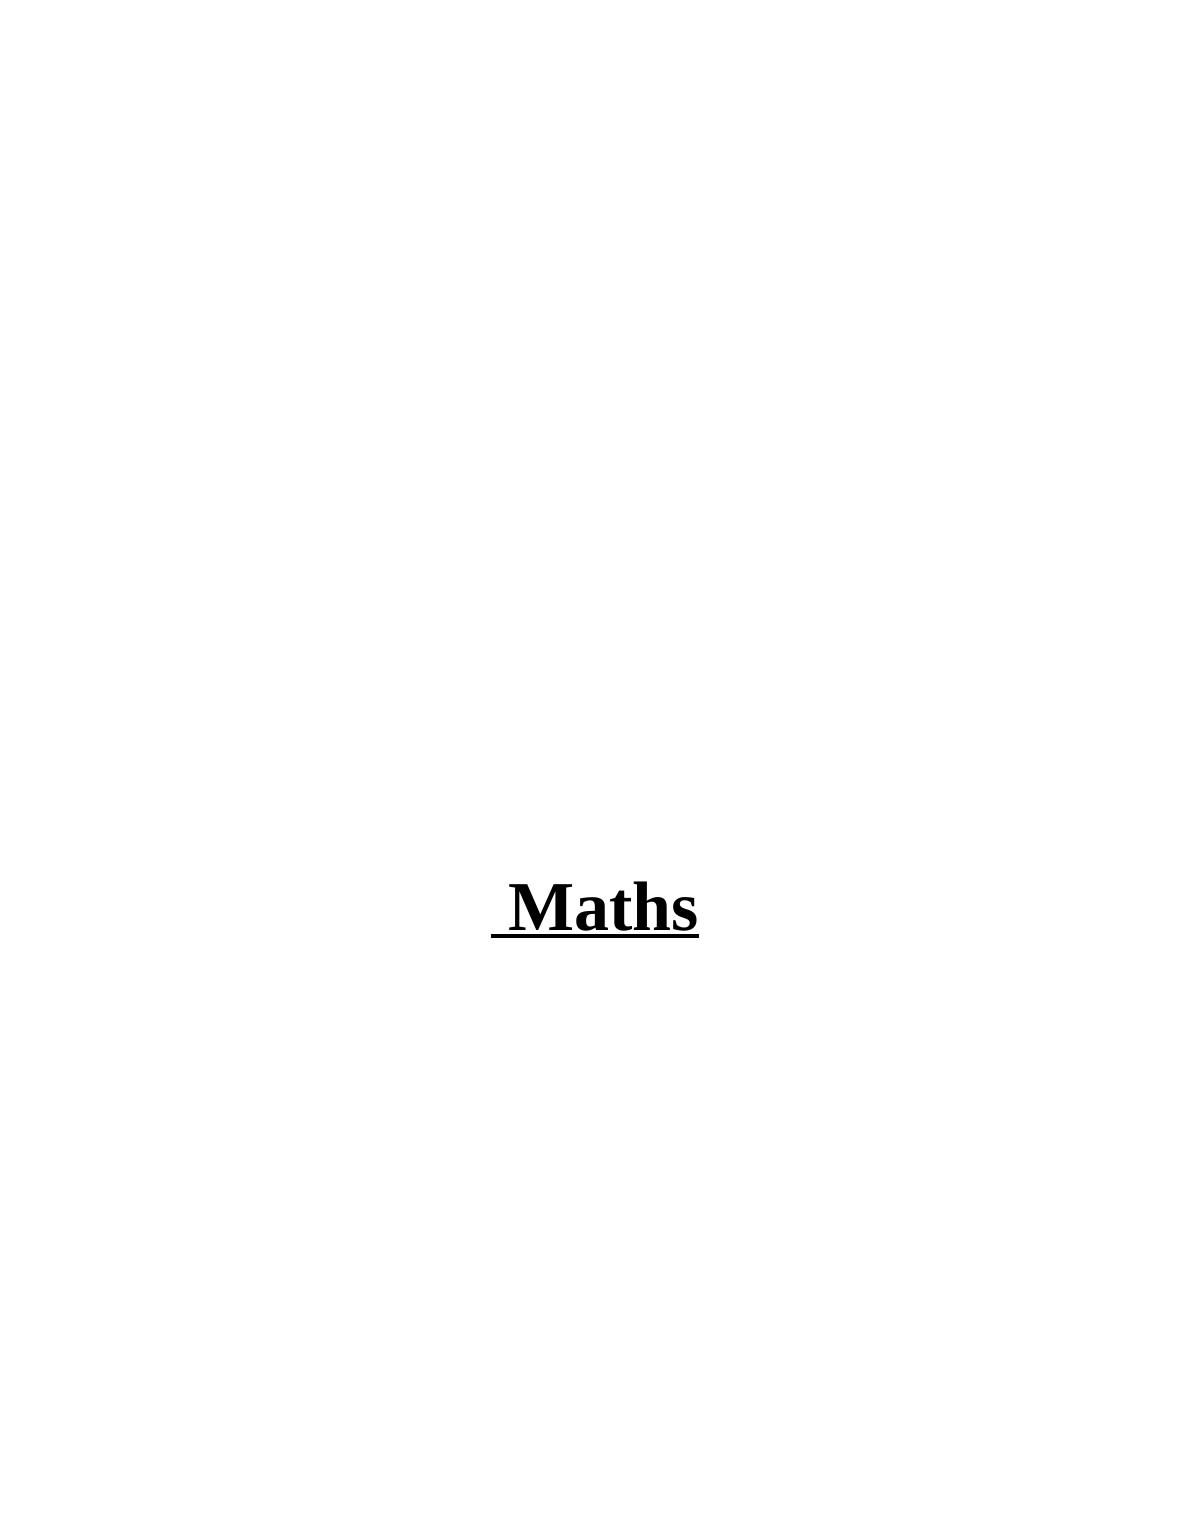 Project Report on Maths Questions_1